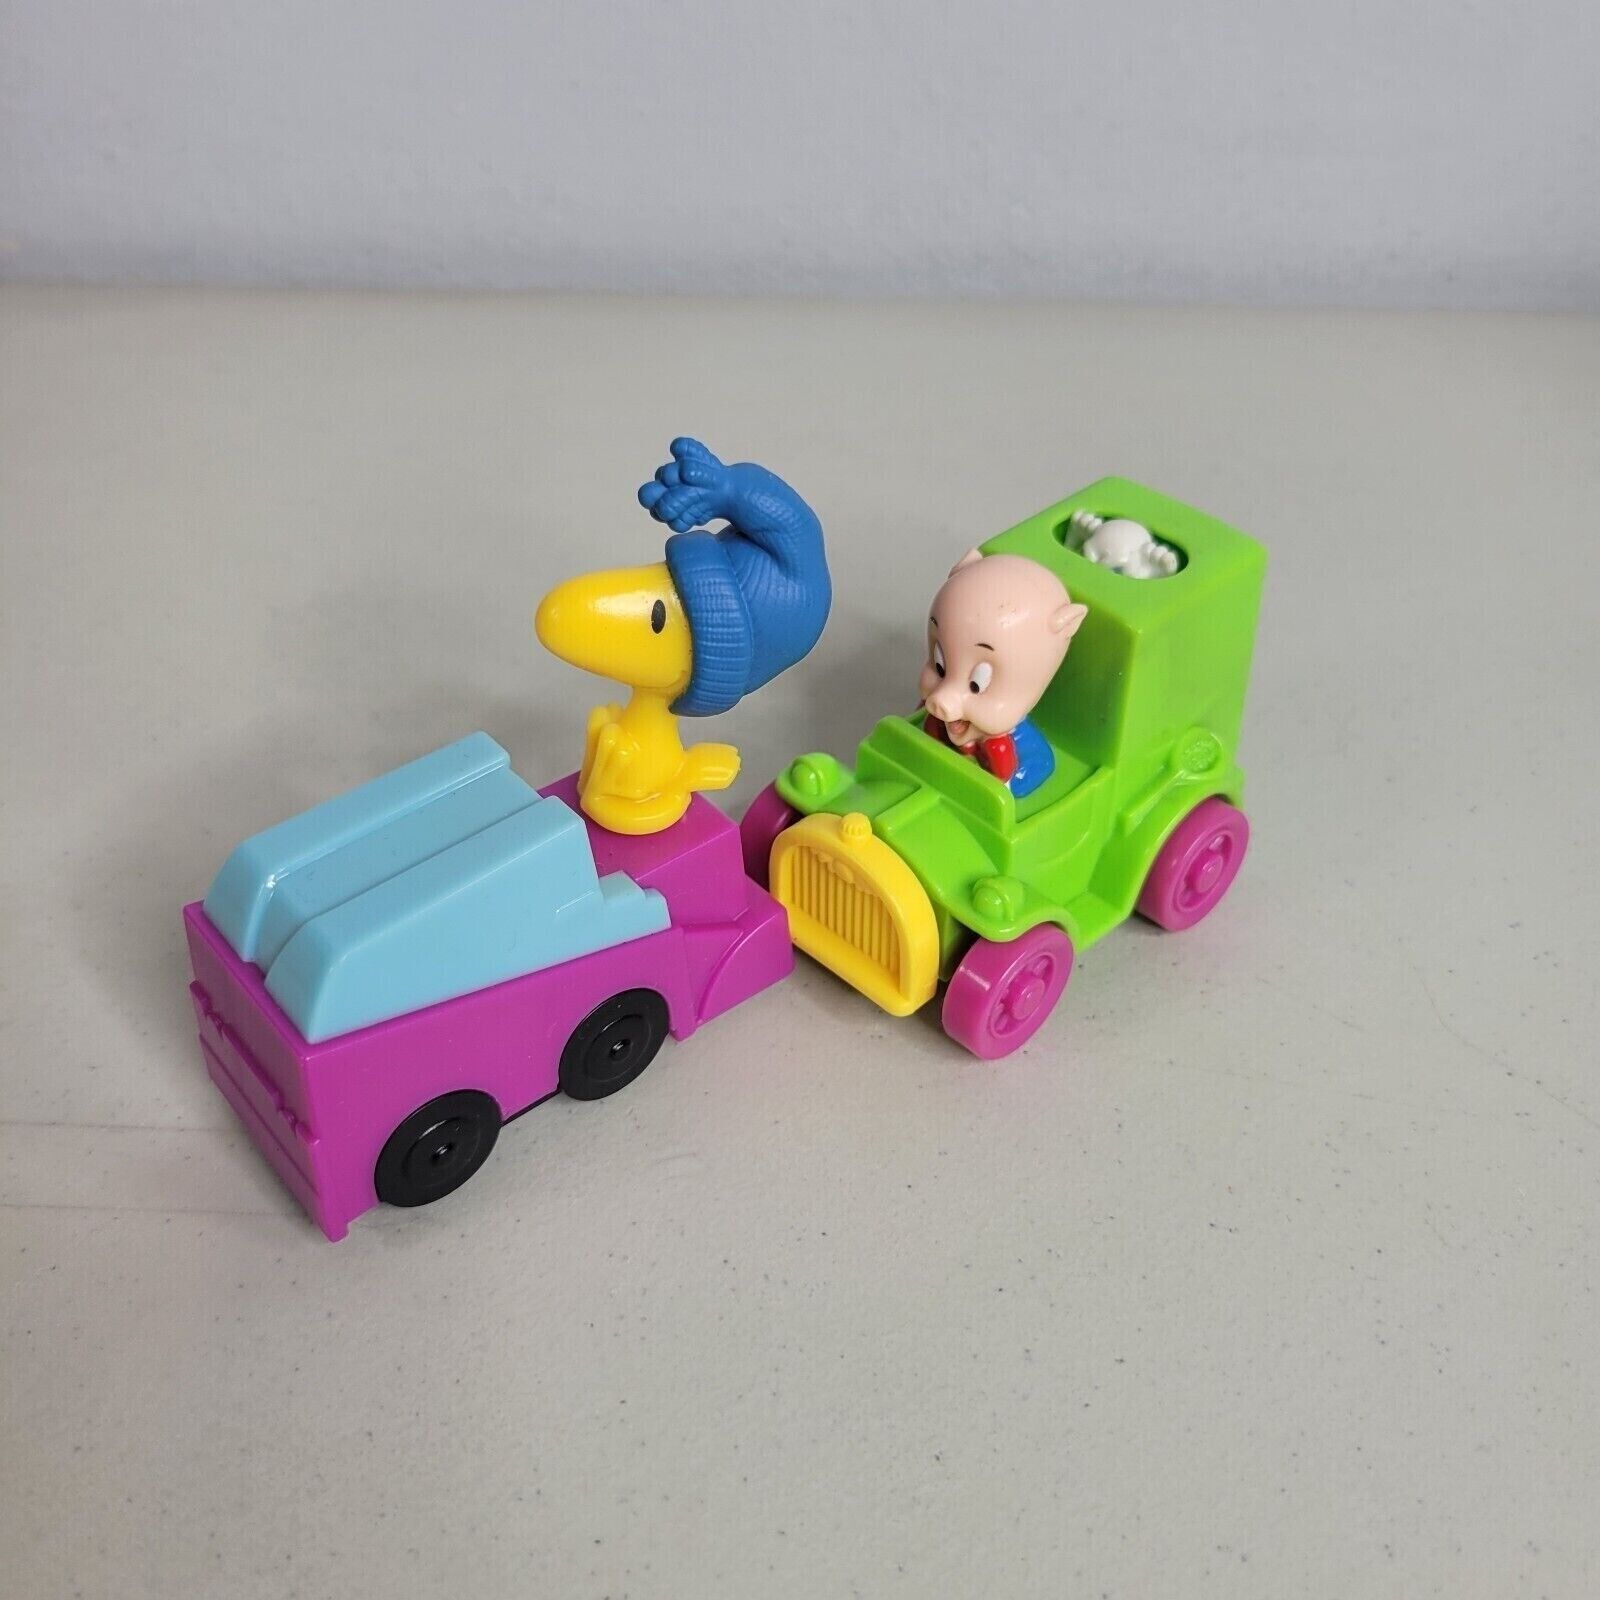 Peanuts Toy Lot Woodstock and Porky Pig McDonalds Happy Meal Toy - $9.99